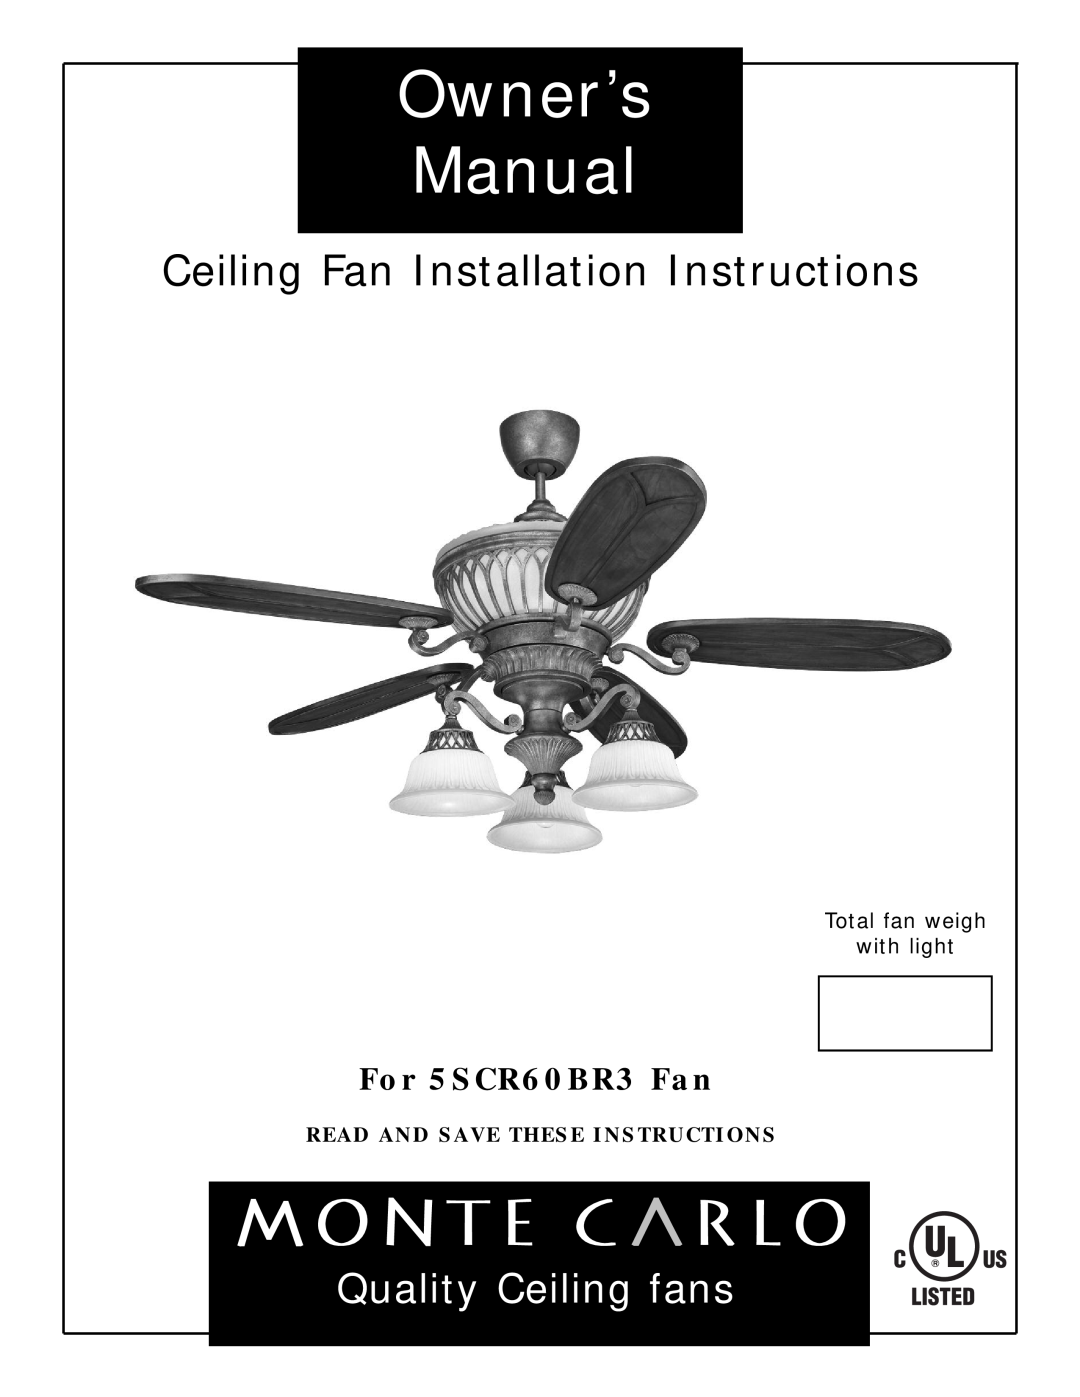 Monte Carlo Fan Company 5SCR60BR3 owner manual Ceiling Fan Installation Instructions, Quality Ceiling fans 